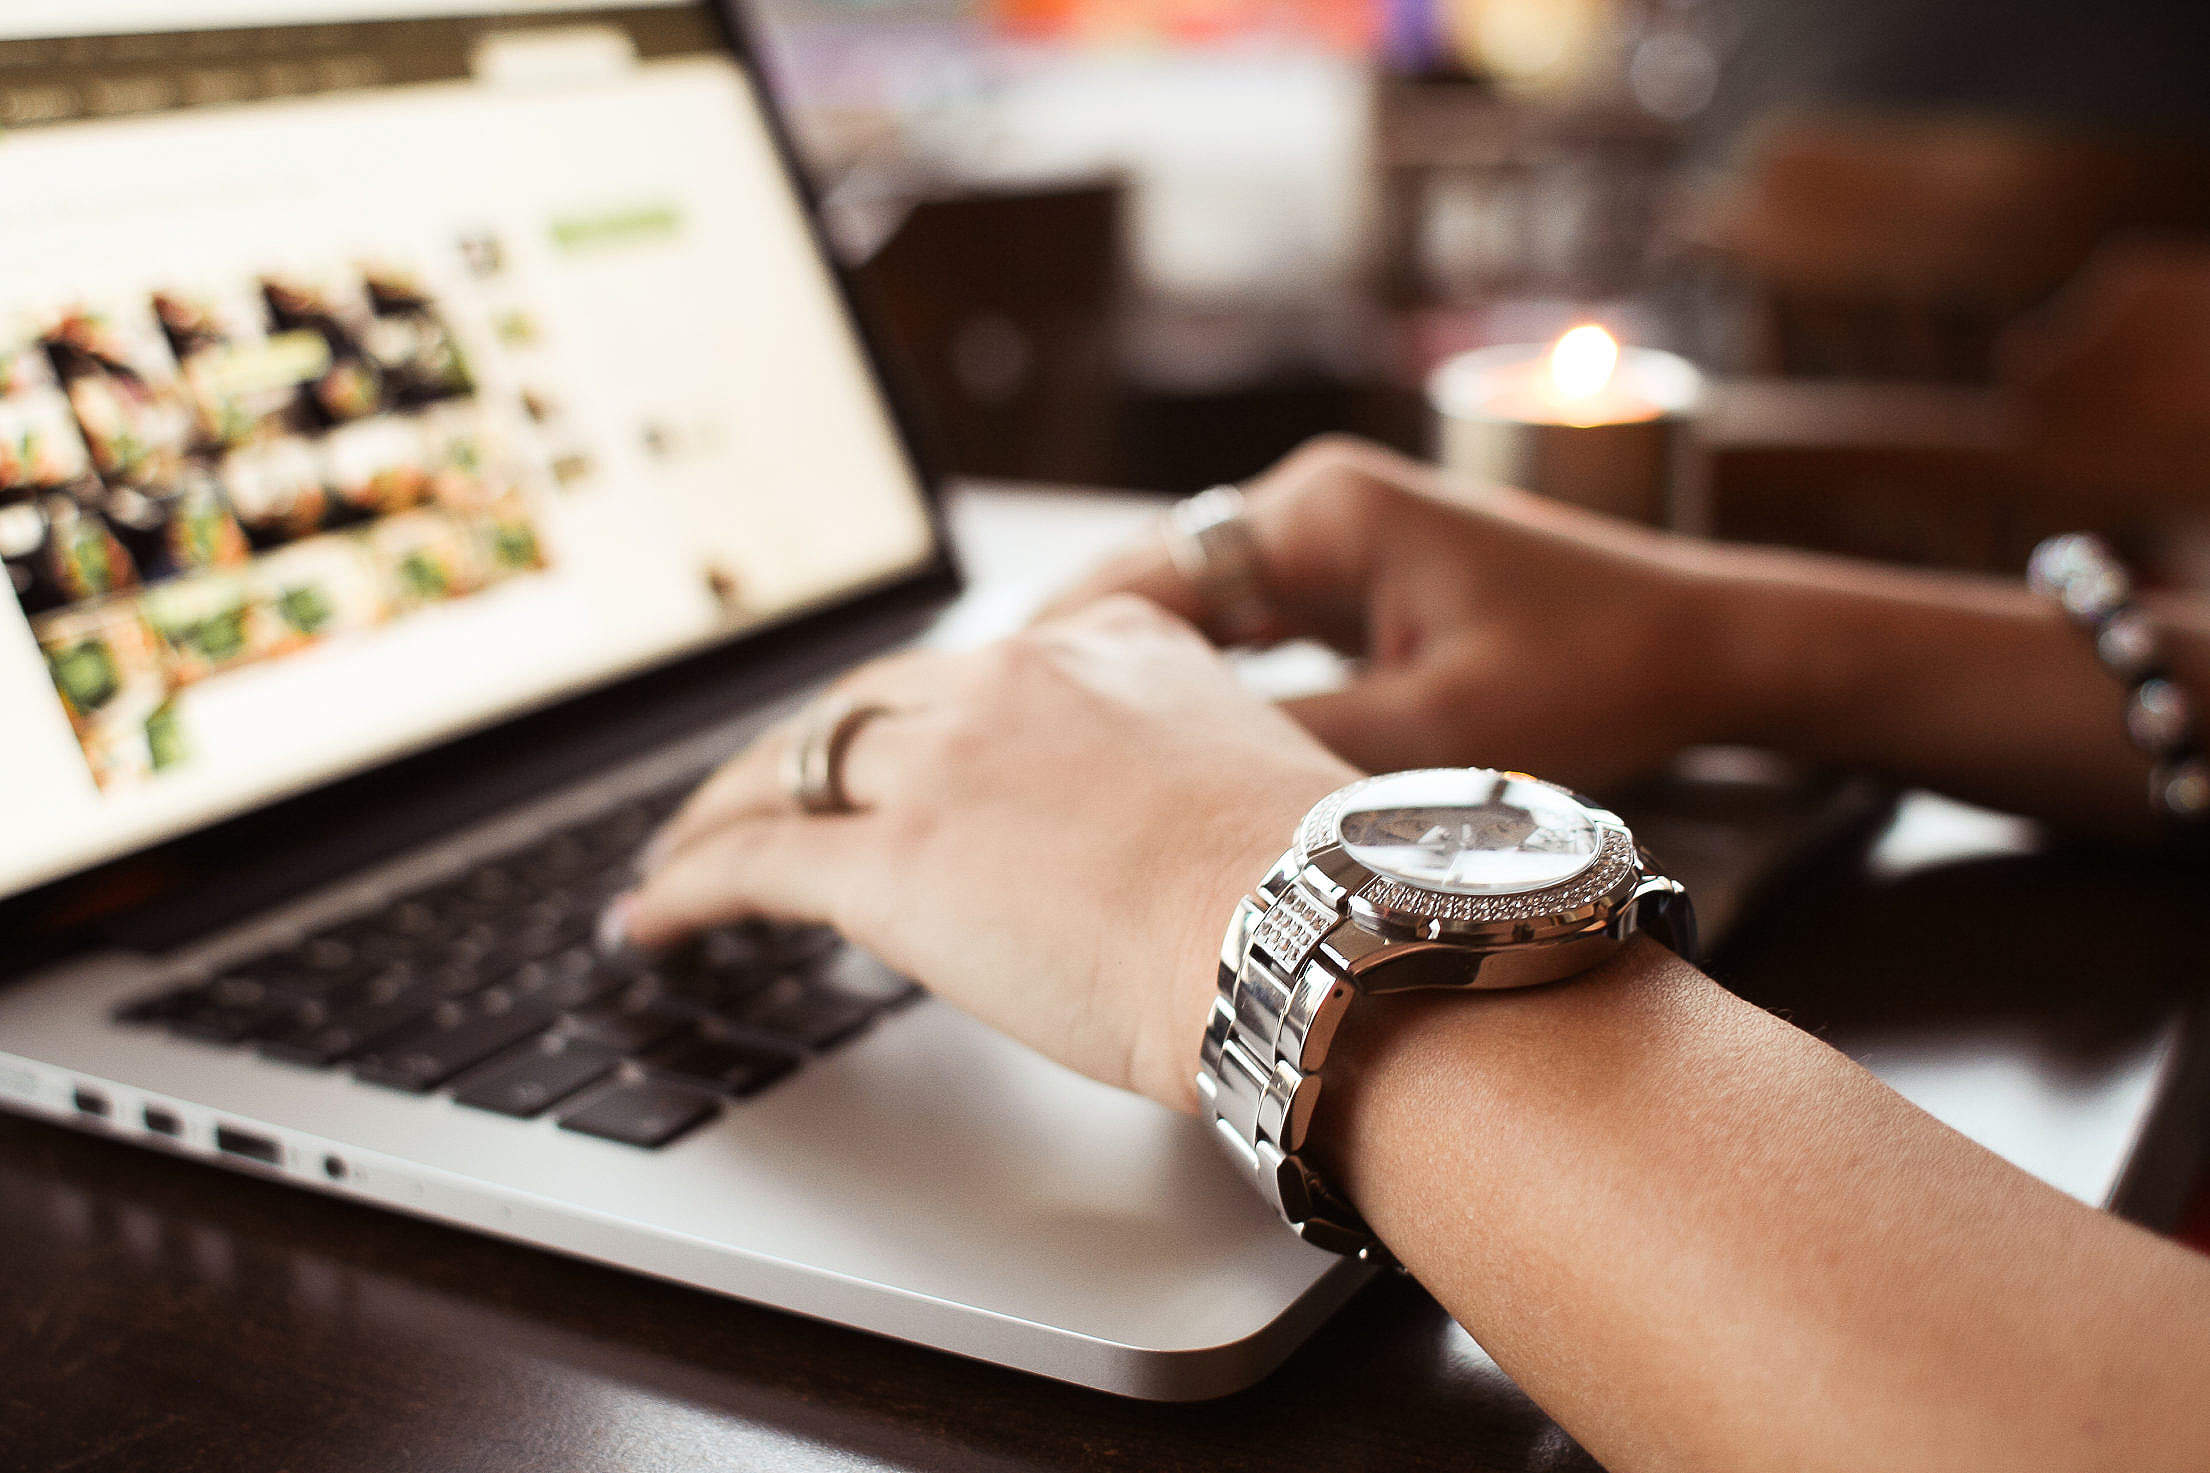 Girl with Watches Typing on MacBook Free Stock Photo